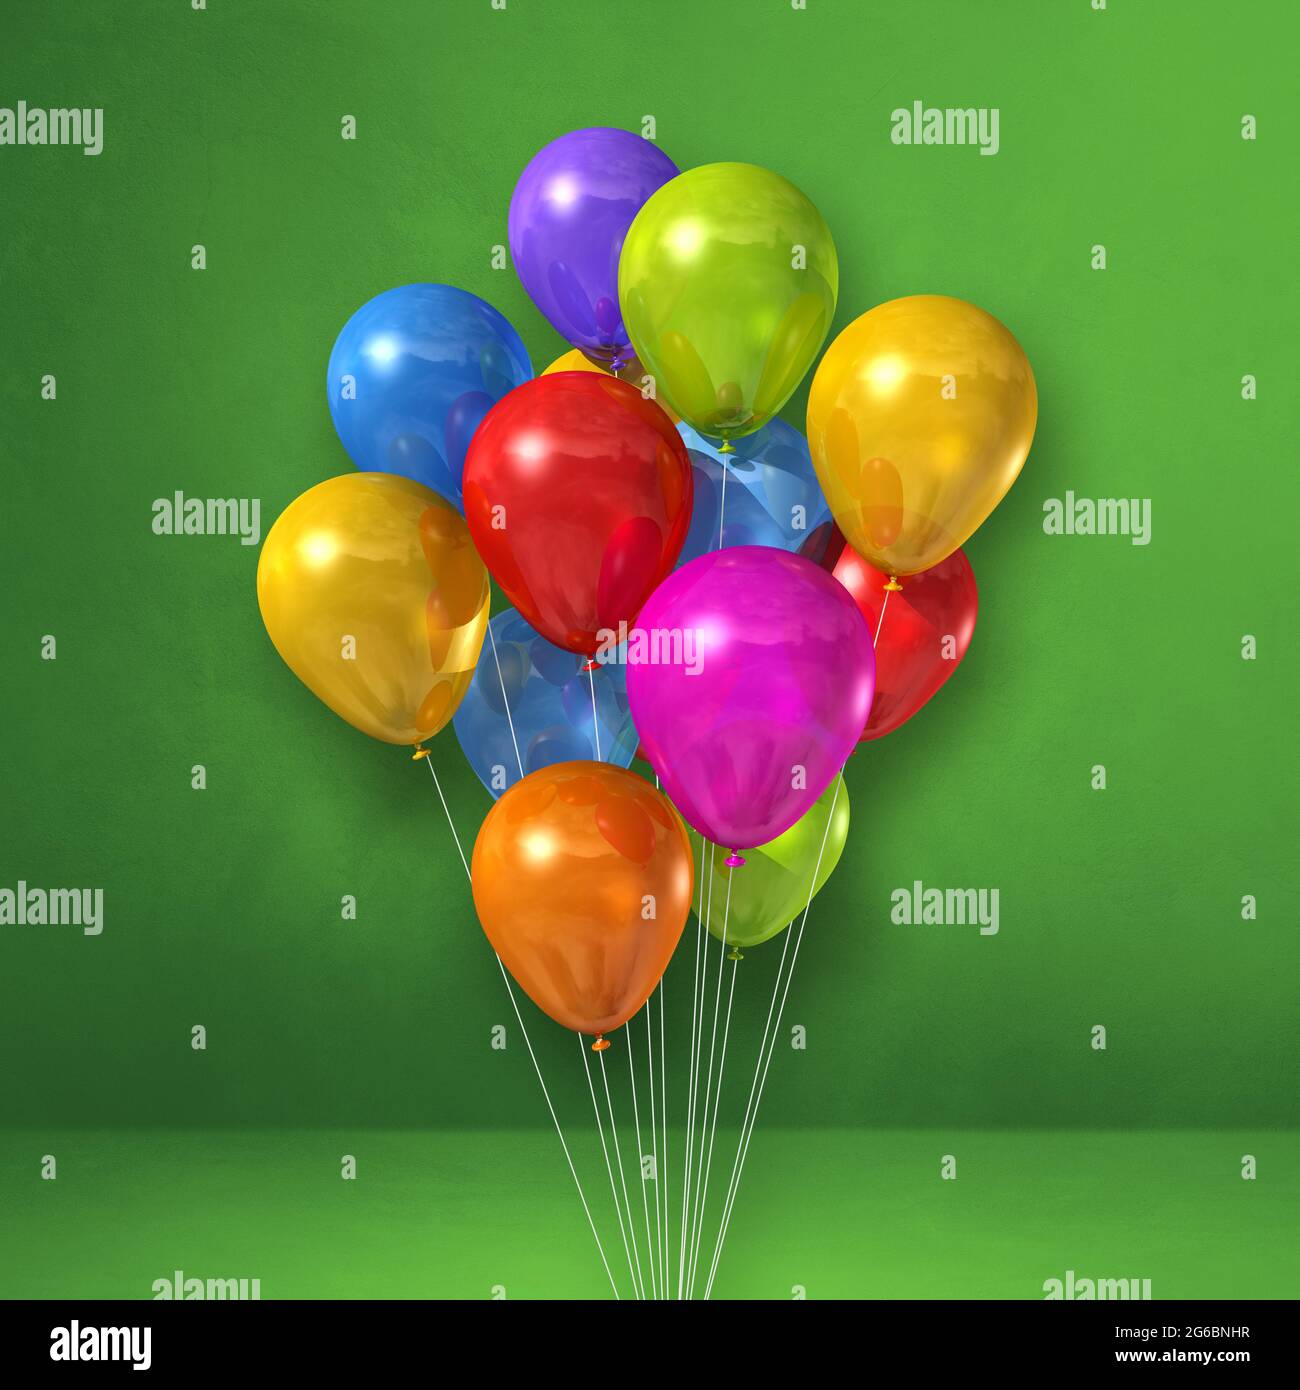 A bunch of colorful balloons hanging from strings Image & Design ID  0000336942 